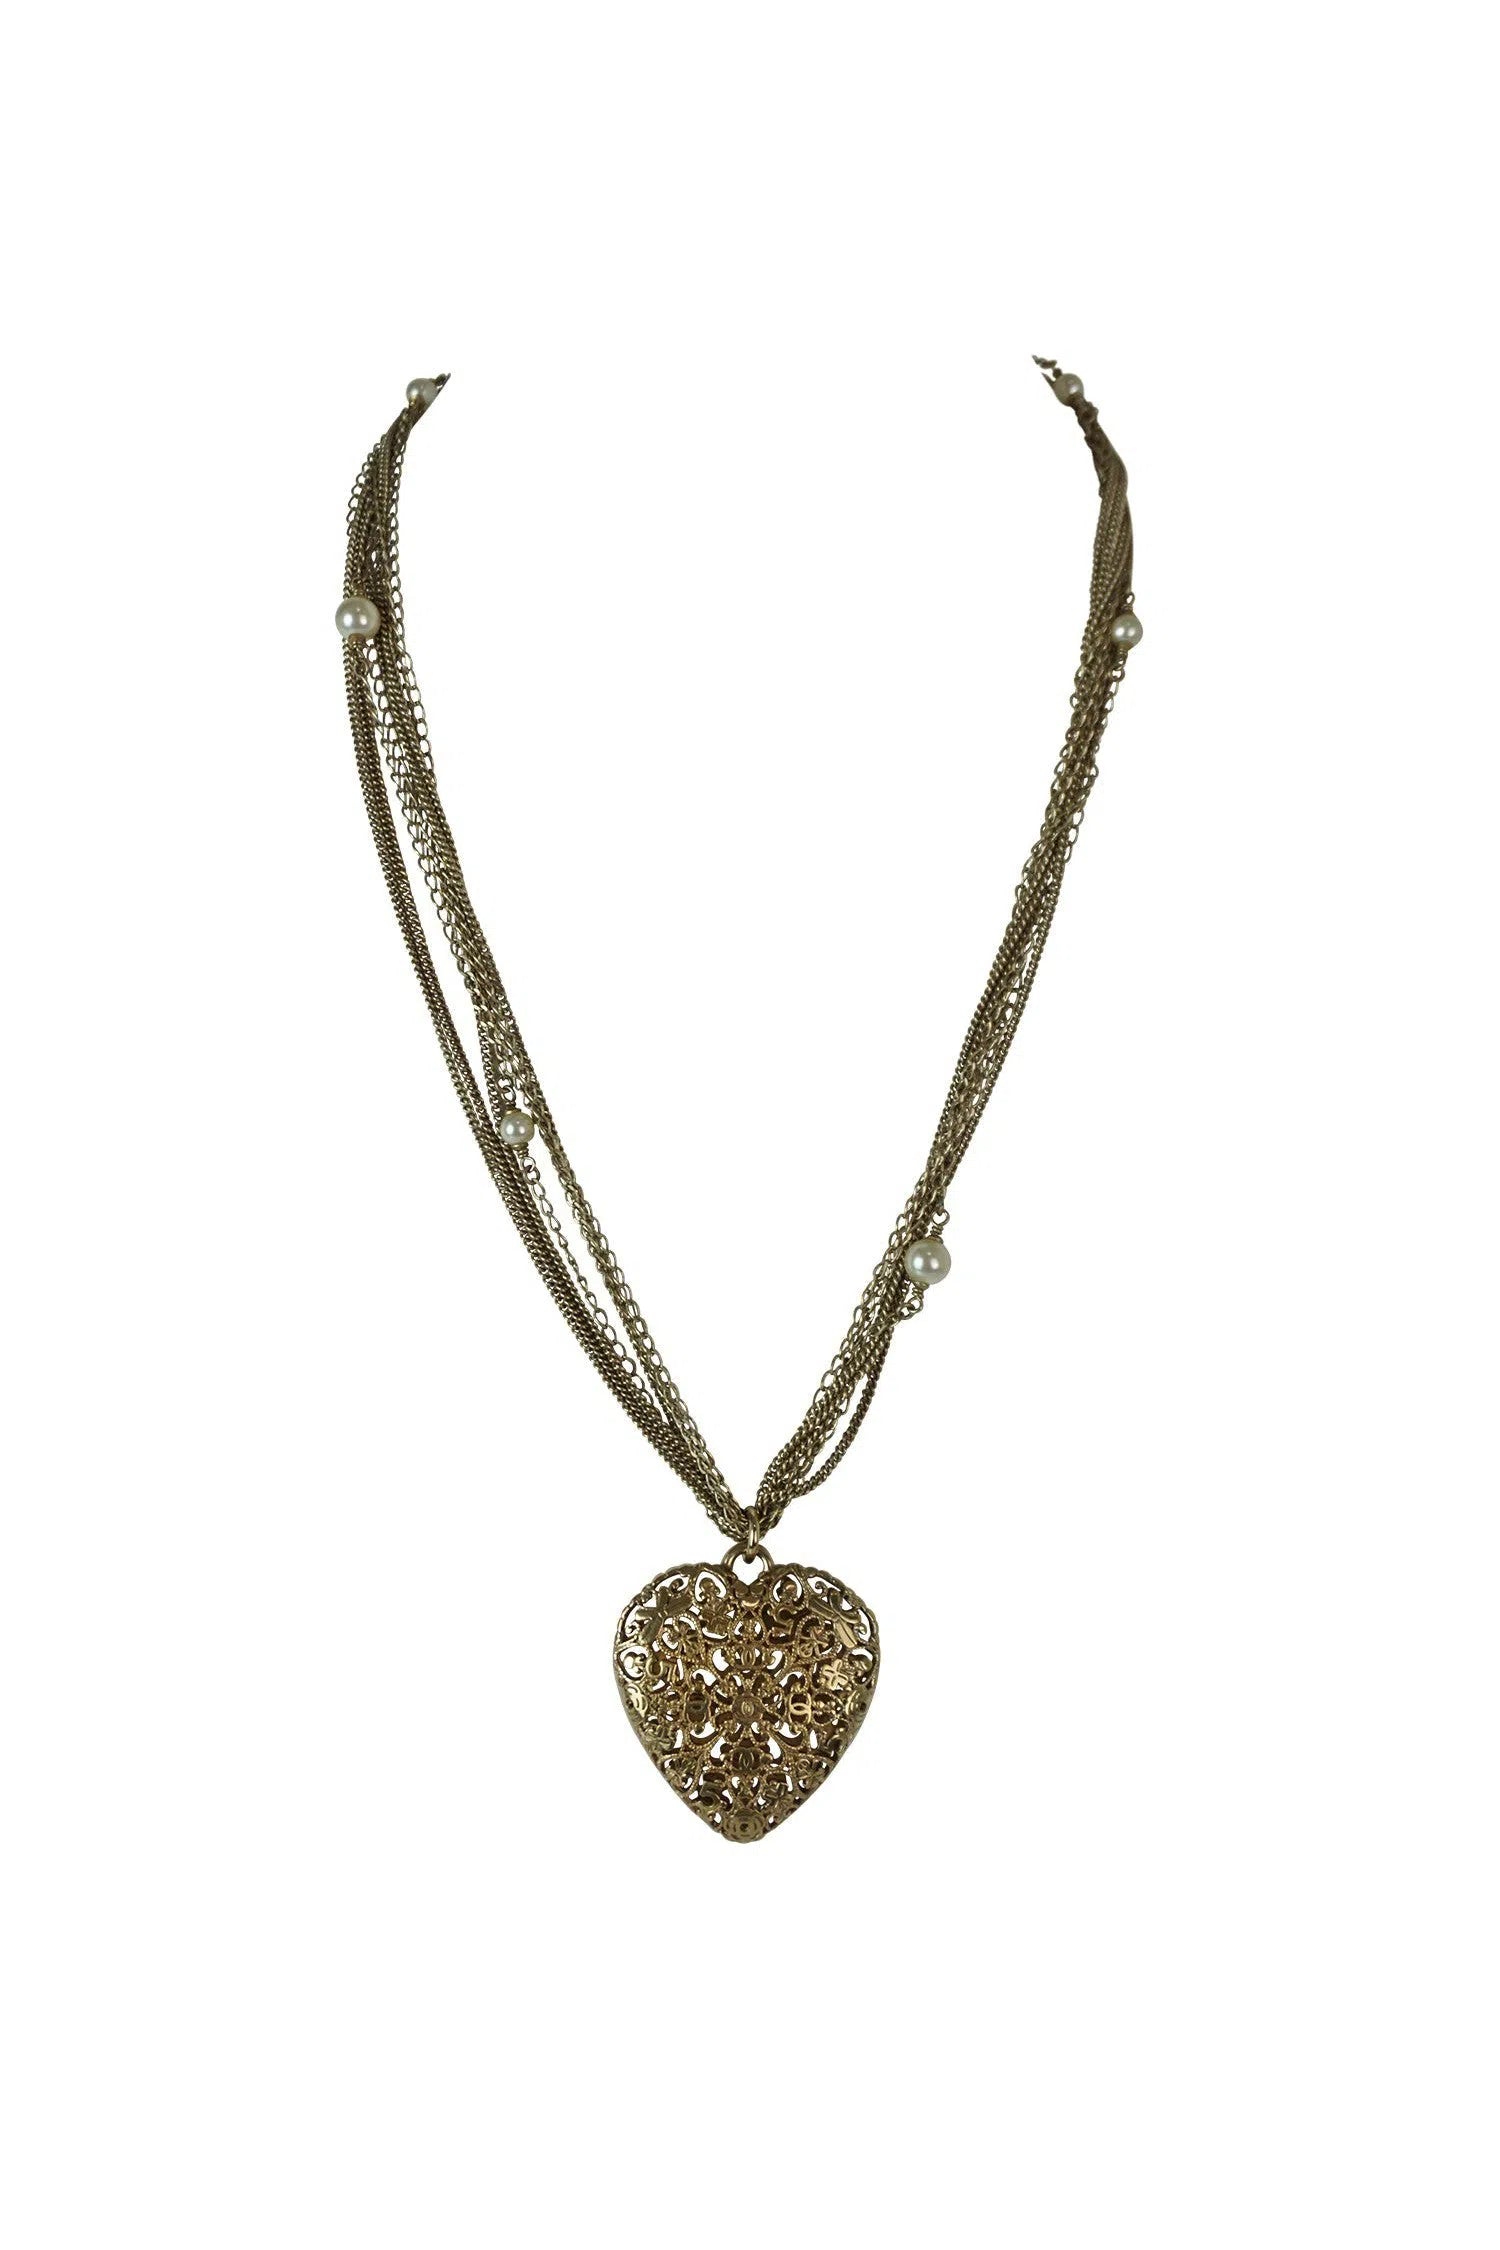 Chanel 2008 Filigree Lucky Charms Heart Necklace - Foxy Couture Carmel